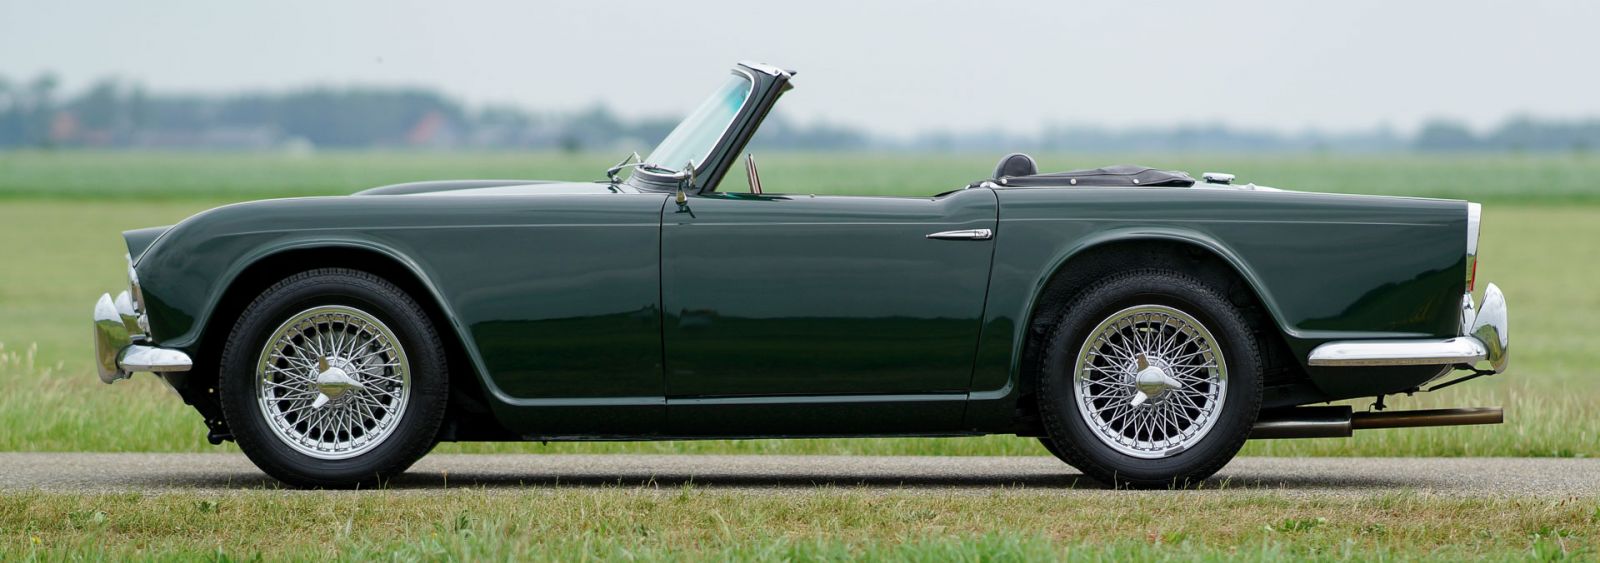 Triumph Tr 4 1964 Welcome To Classicargarage